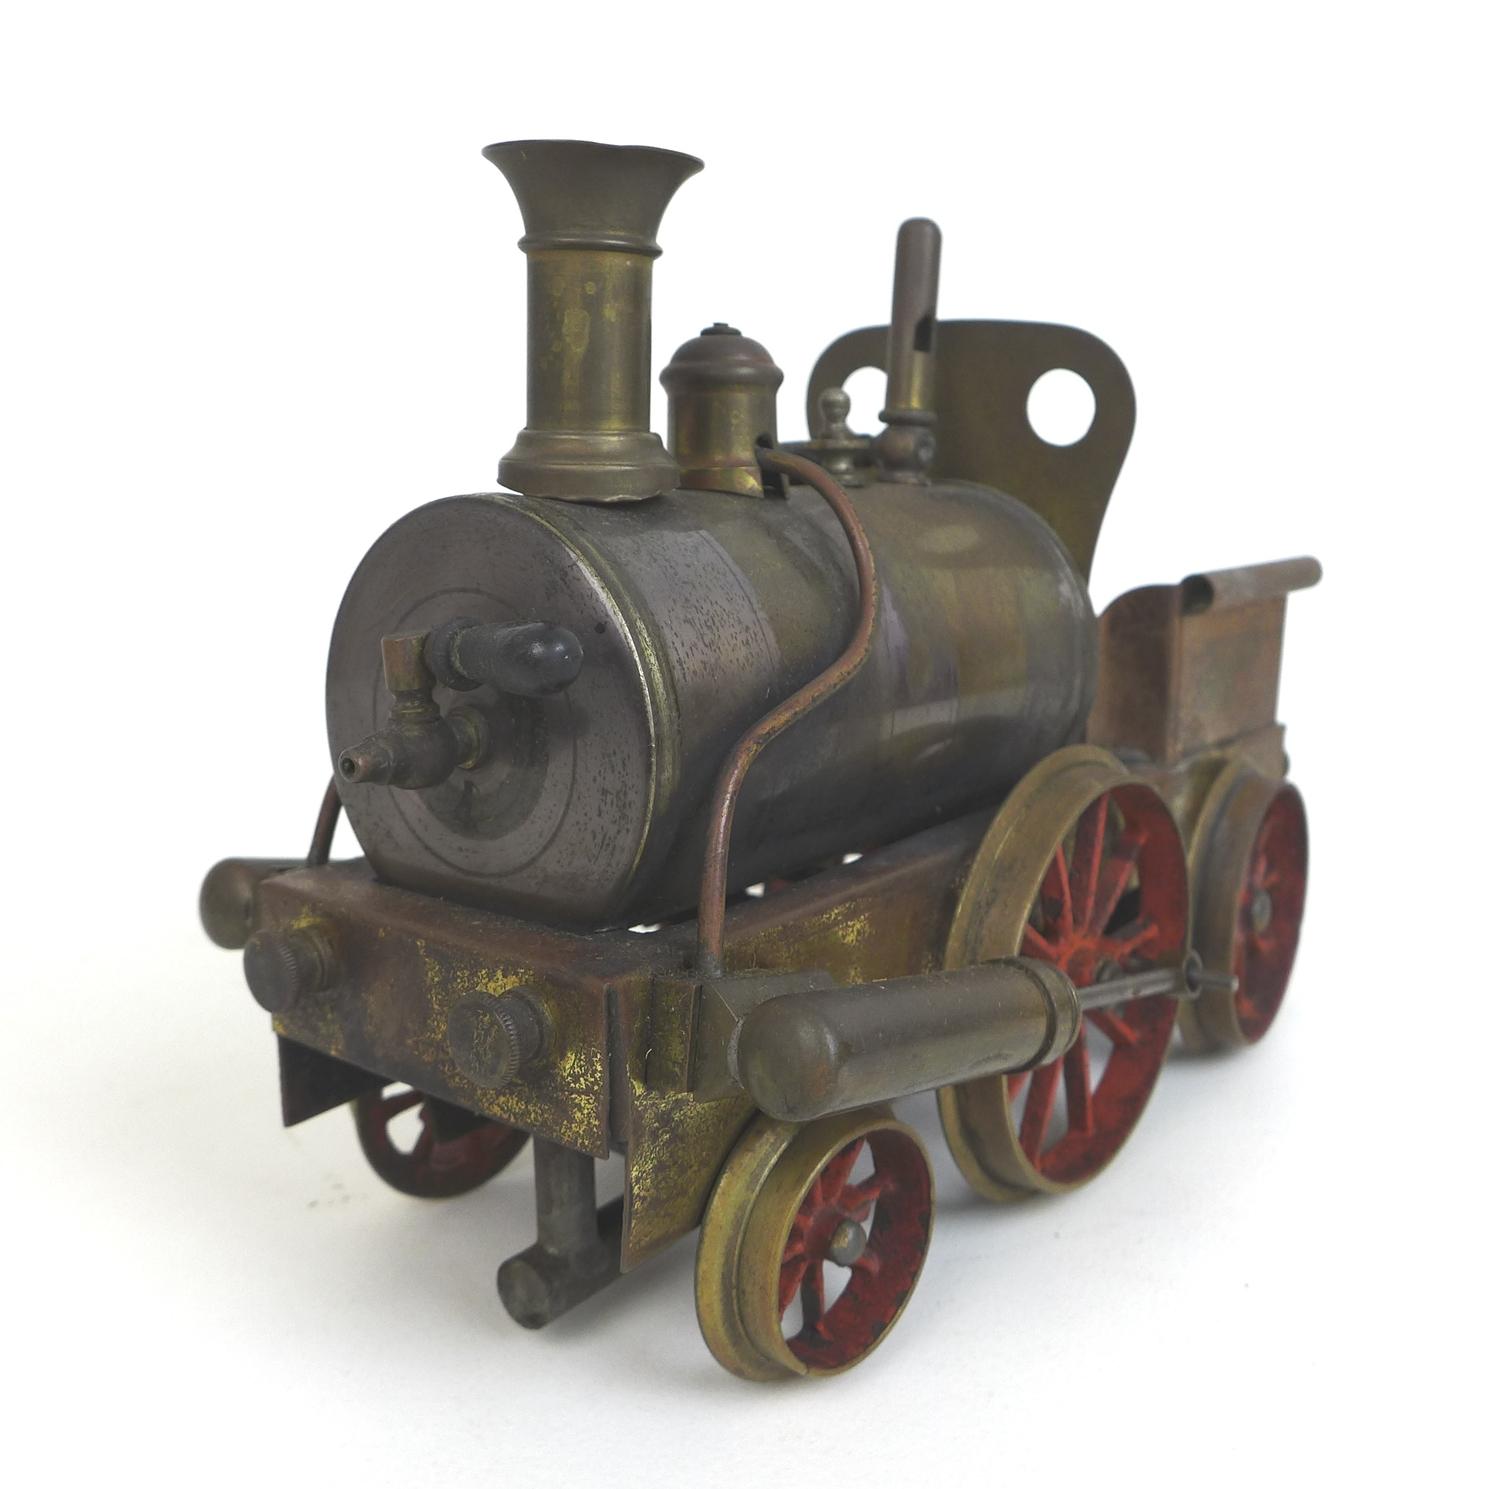 A live steam spirit fuelled 2-2-2 locomotive, possibly Stevens Model Dockyard or similar with twin